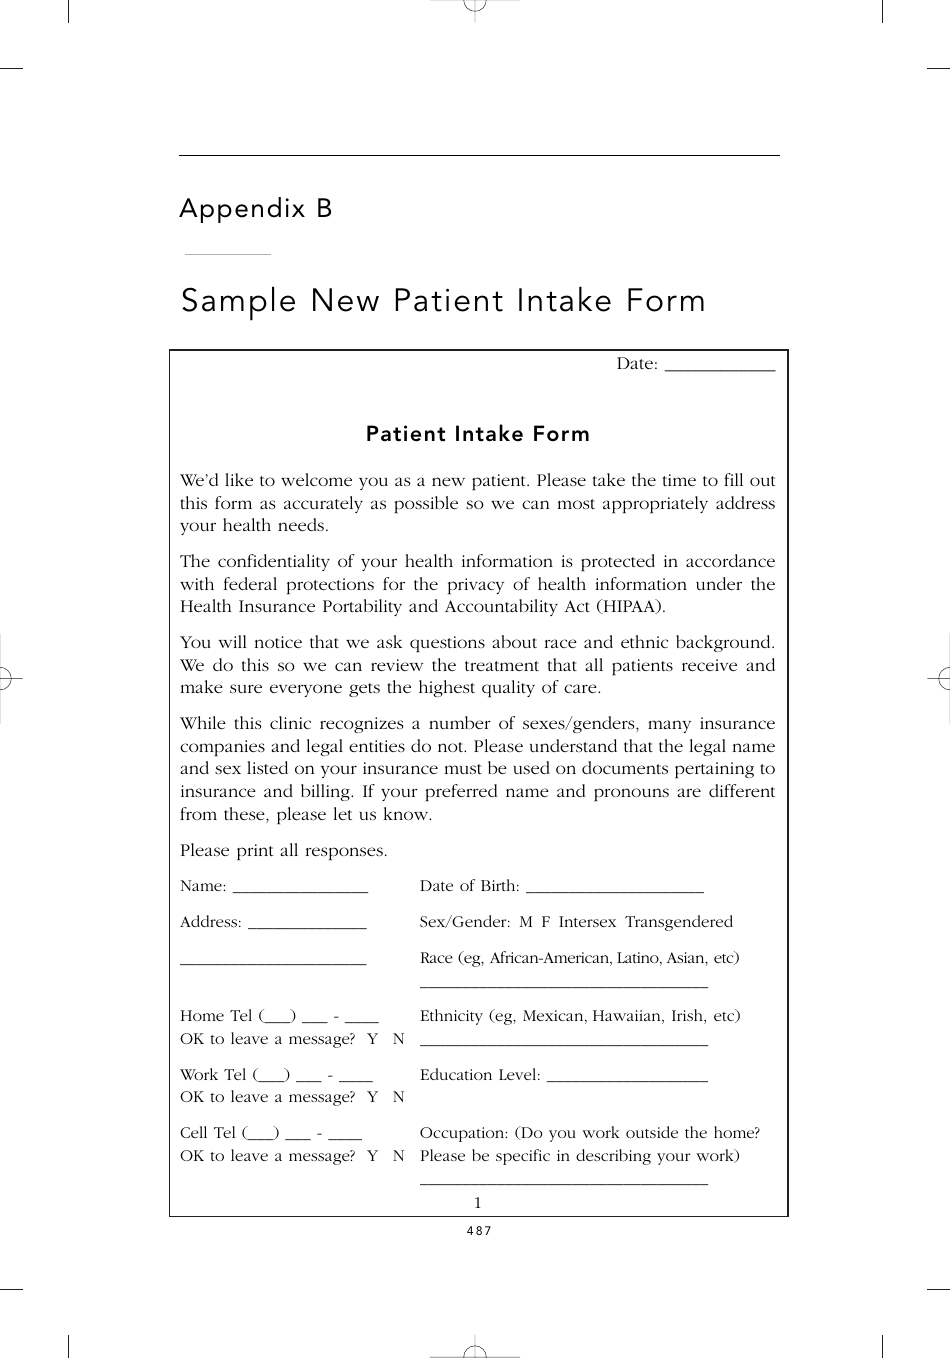 Sample New Patient Intake Form, Page 1